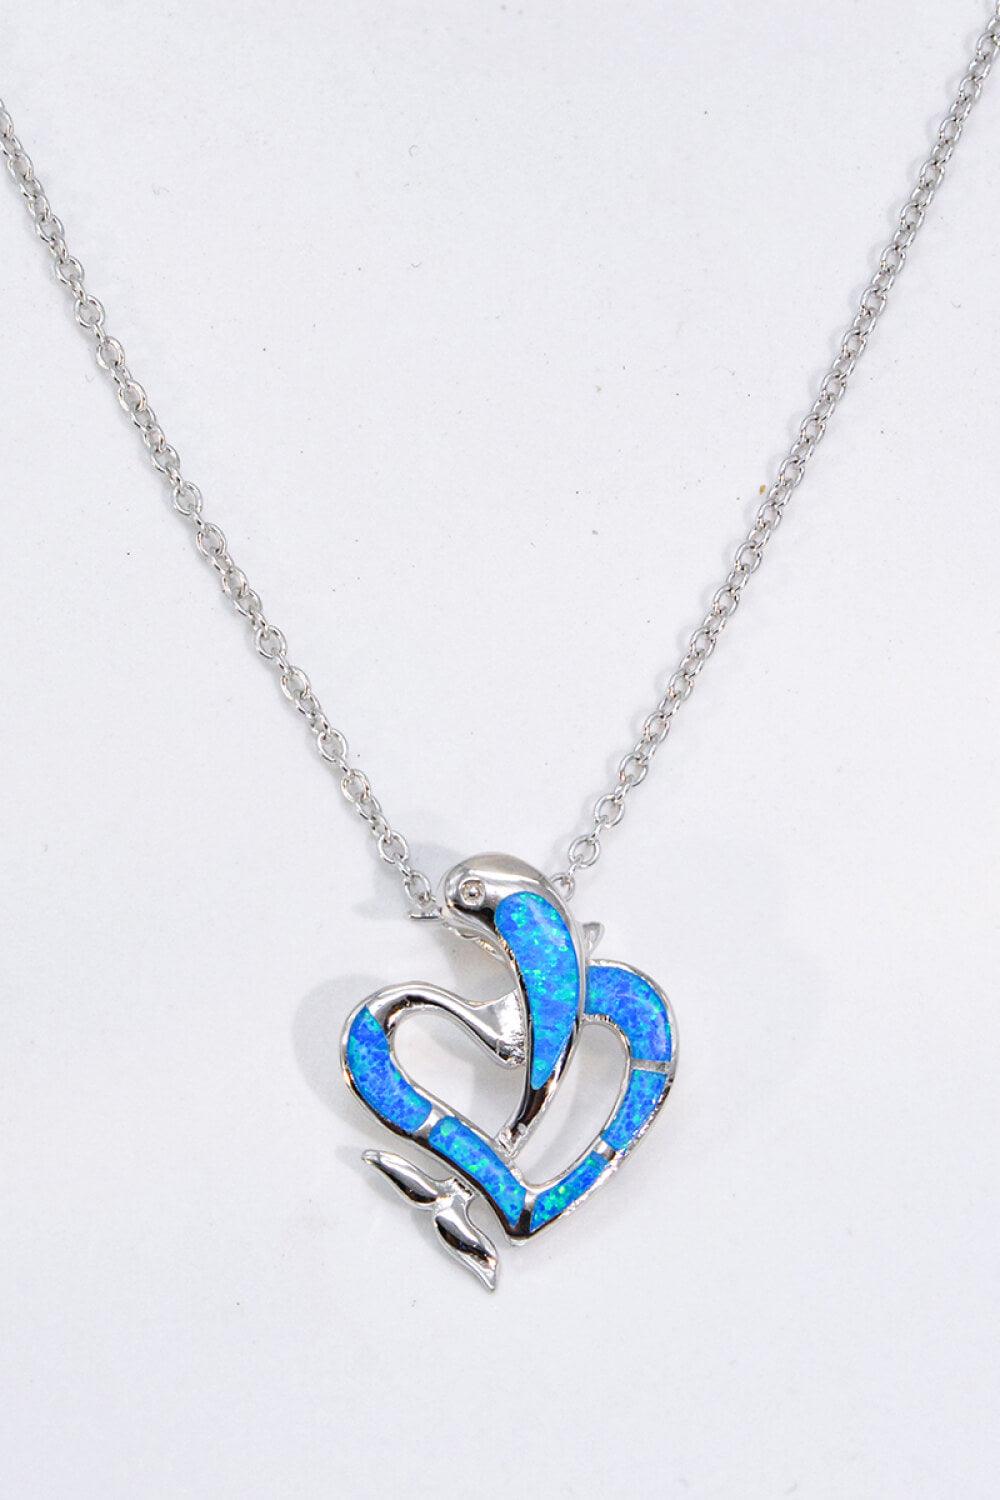 Blue Opal Dolphin Heart Chain-Link Necklace - Crazy Like a Daisy Boutique #